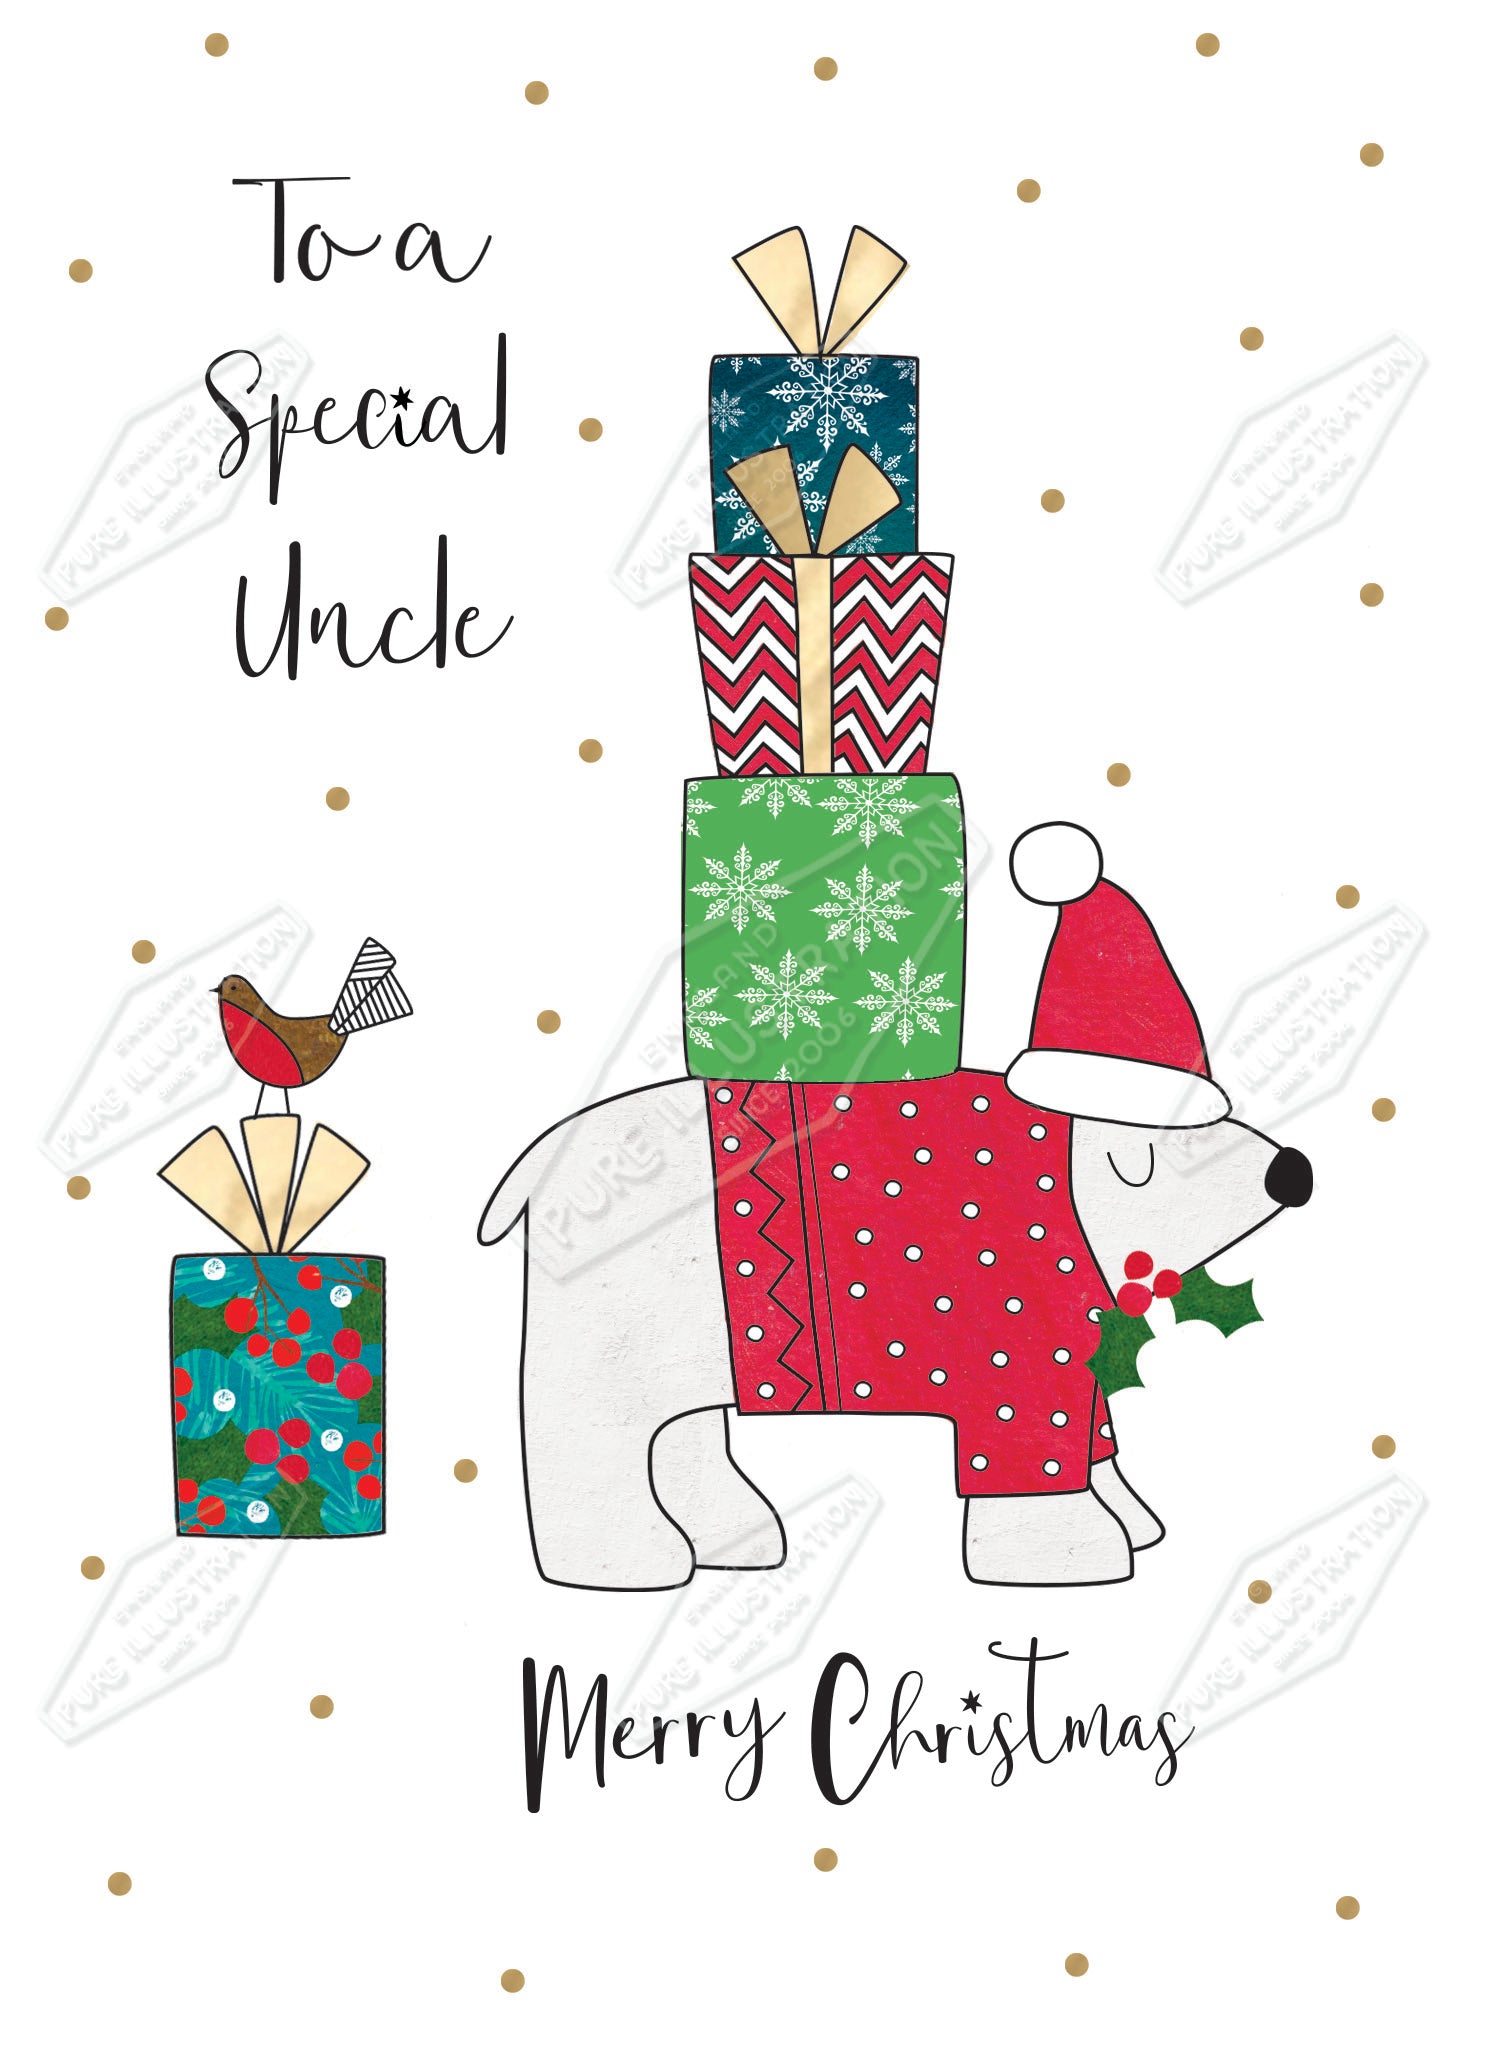 00035426IMC- Isla McDonald is represented by Pure Art Licensing Agency - Christmas Greeting Card Design